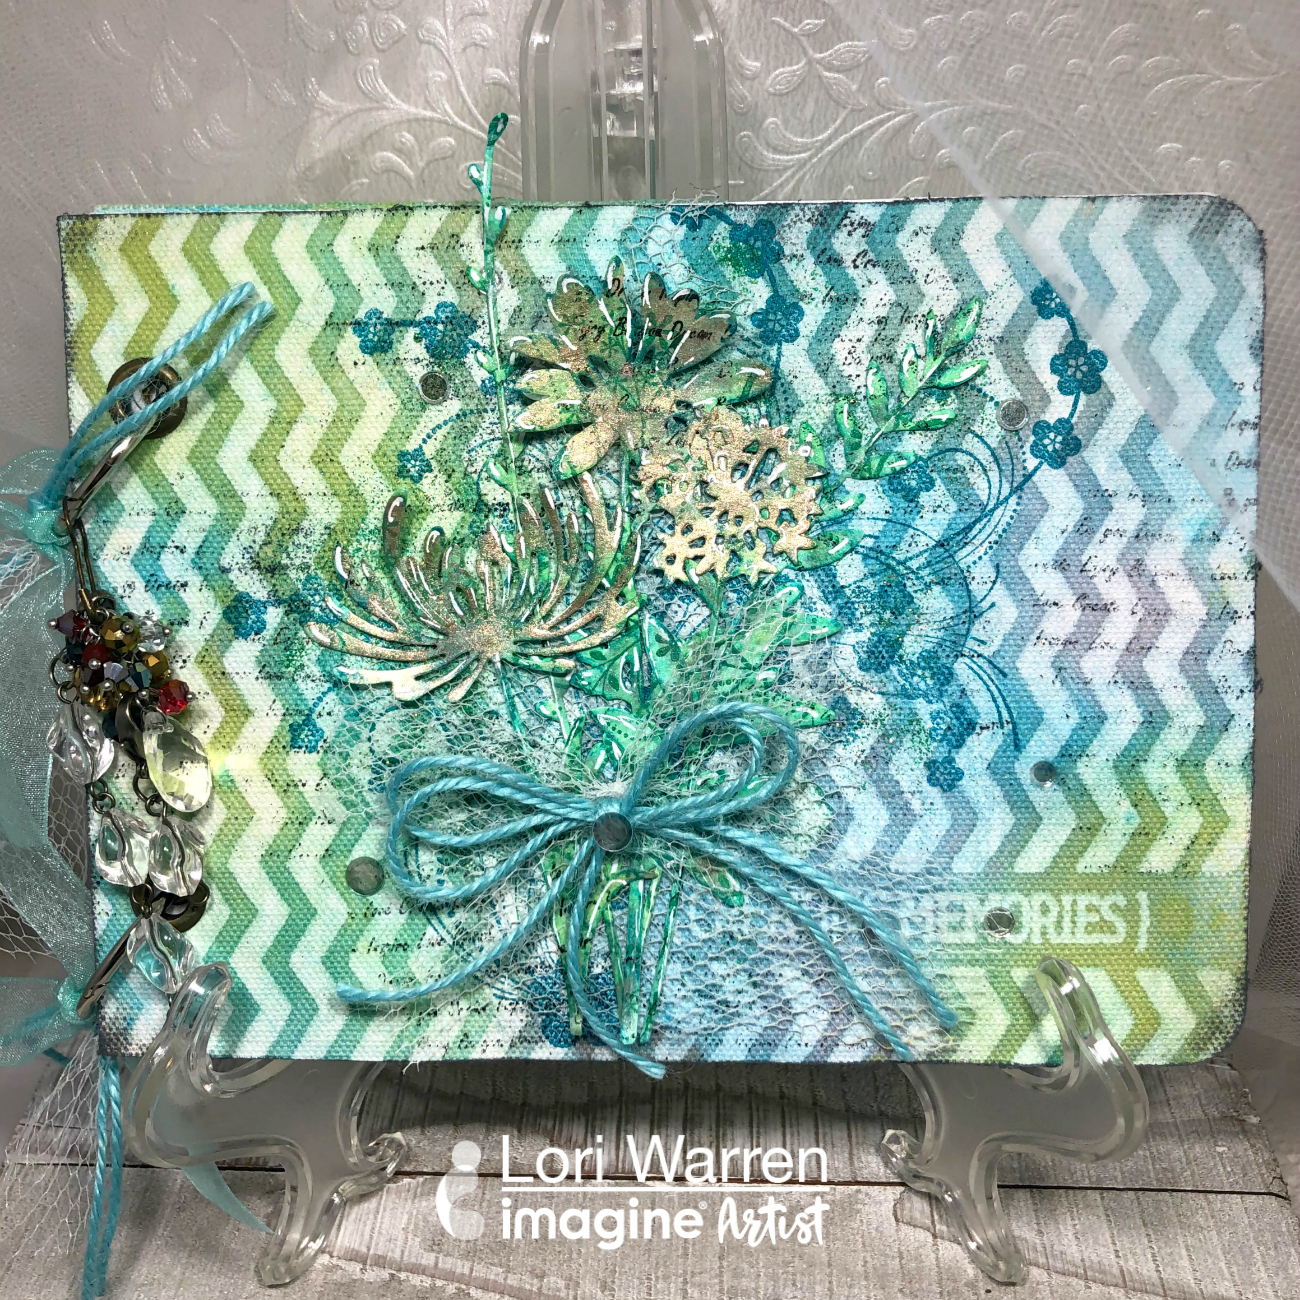 Handmade creative art journal featuring a mixed media cover in blues and greens.